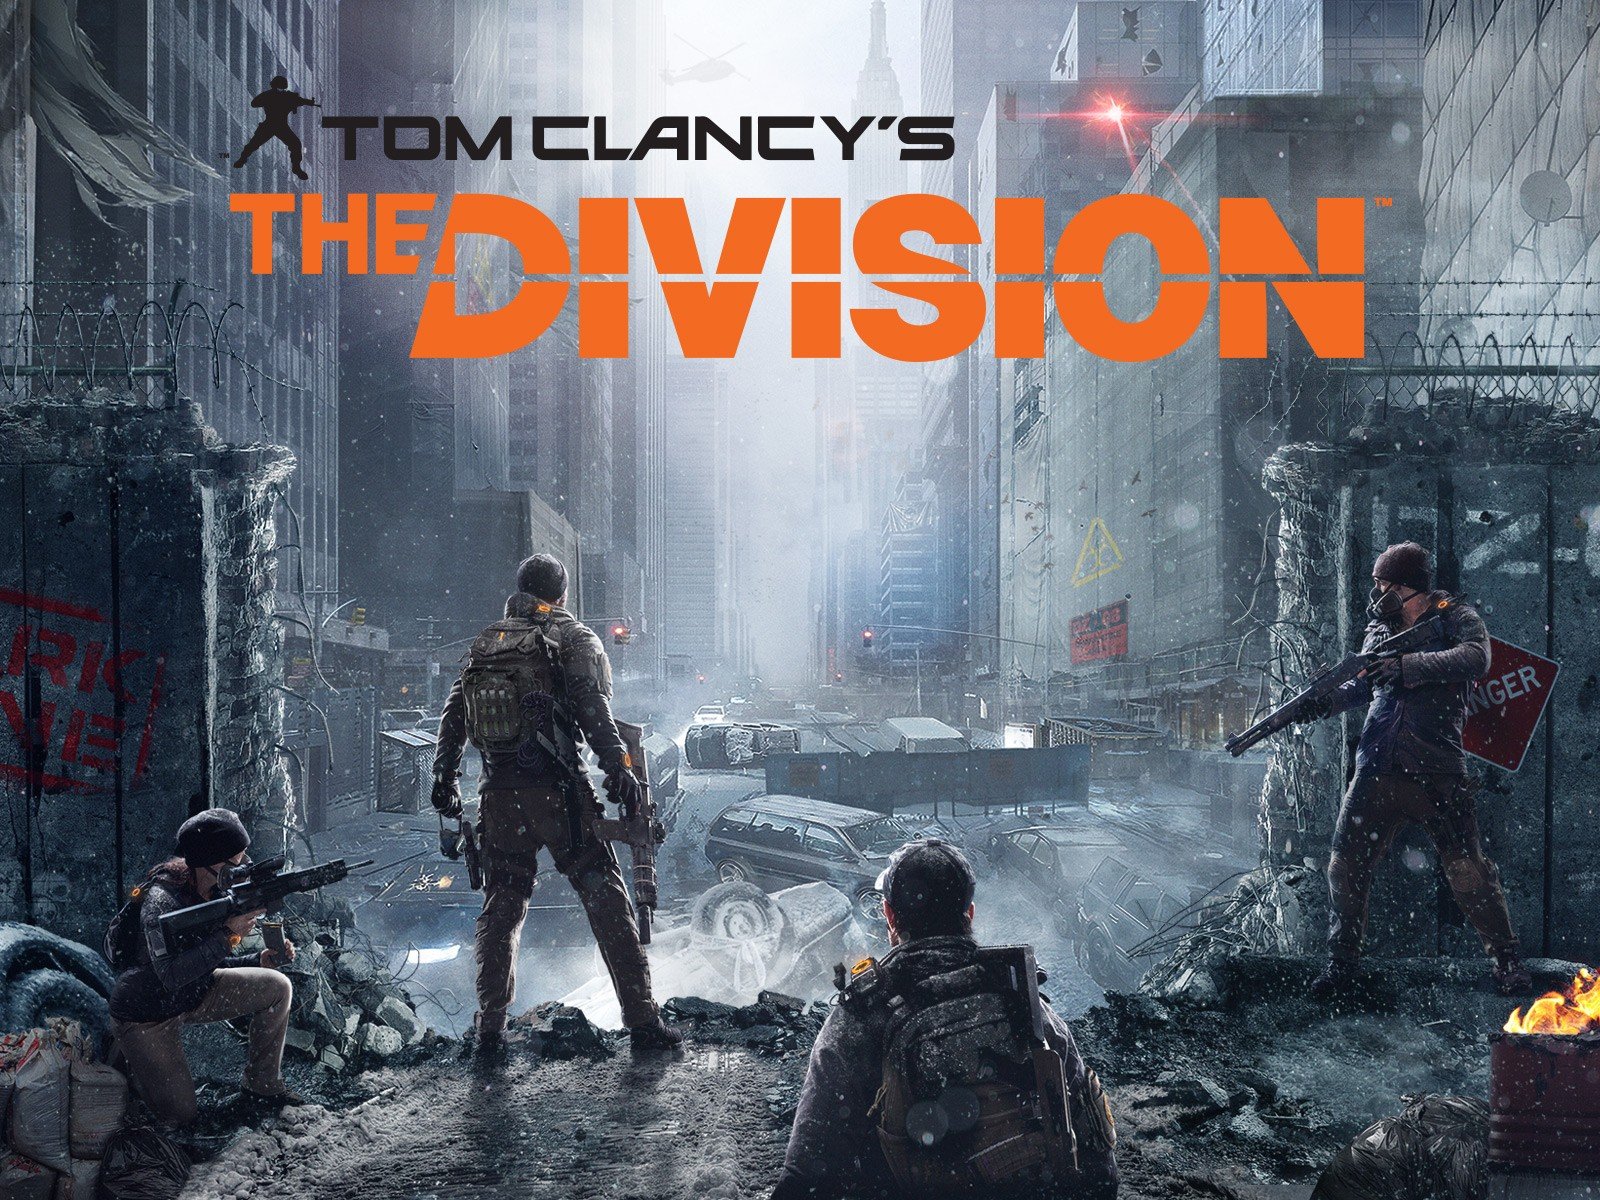 people, Tom Clancys The Division, Computer game, Apocalyptic, Weapon Wallpaper